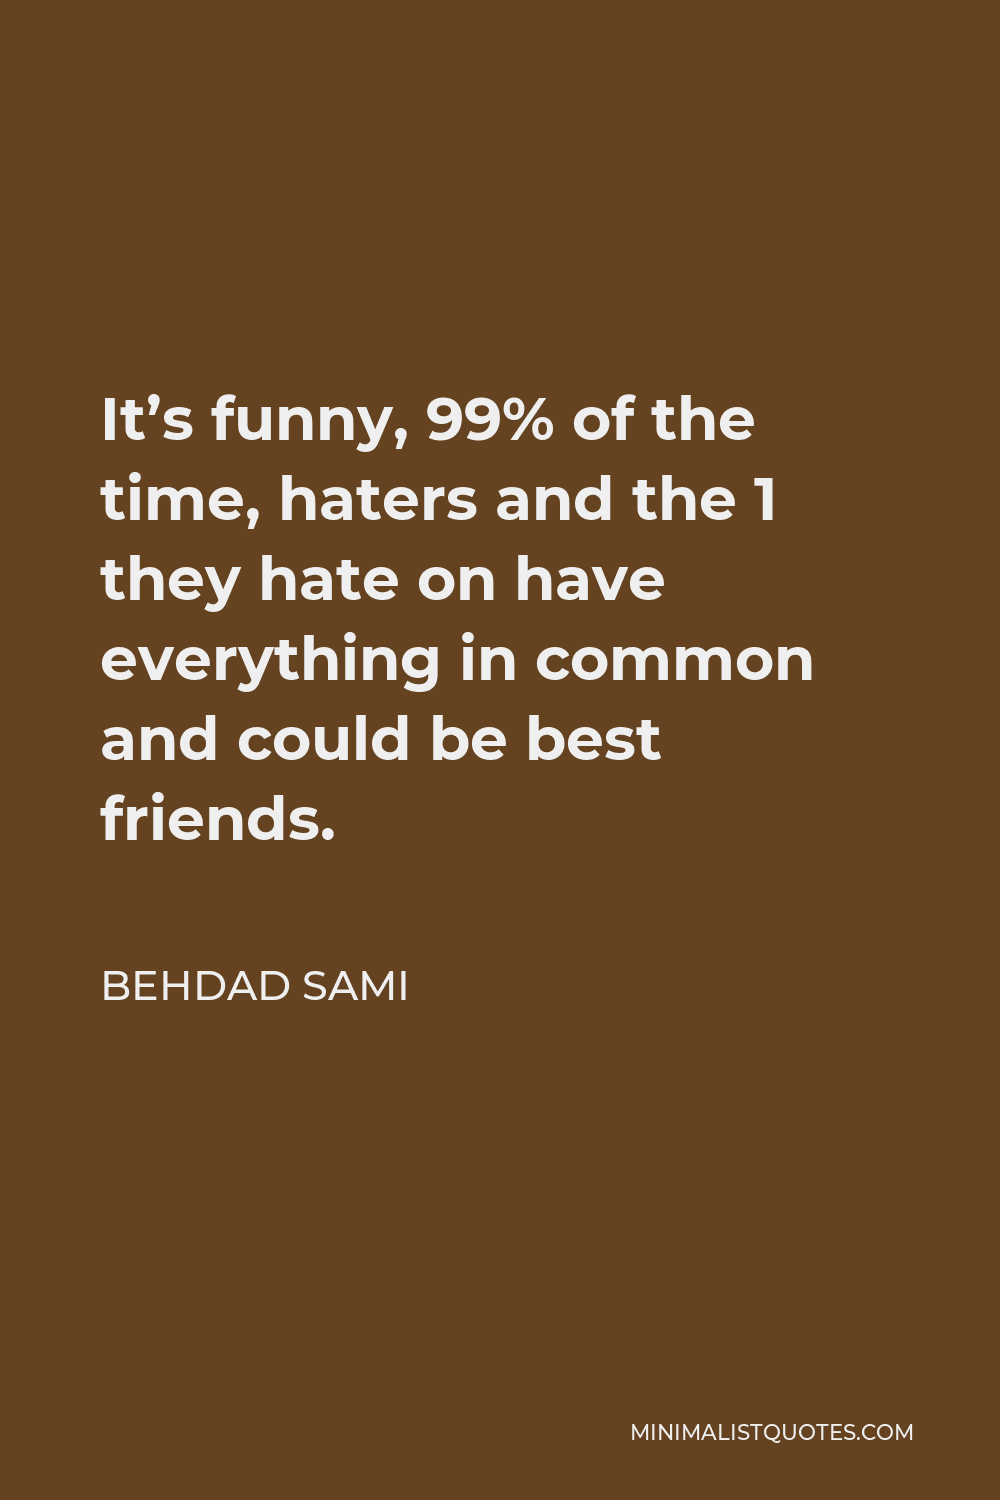 Behdad Sami Quote - It’s funny, 99% of the time, haters and the 1 they hate on have everything in common and could be best friends.